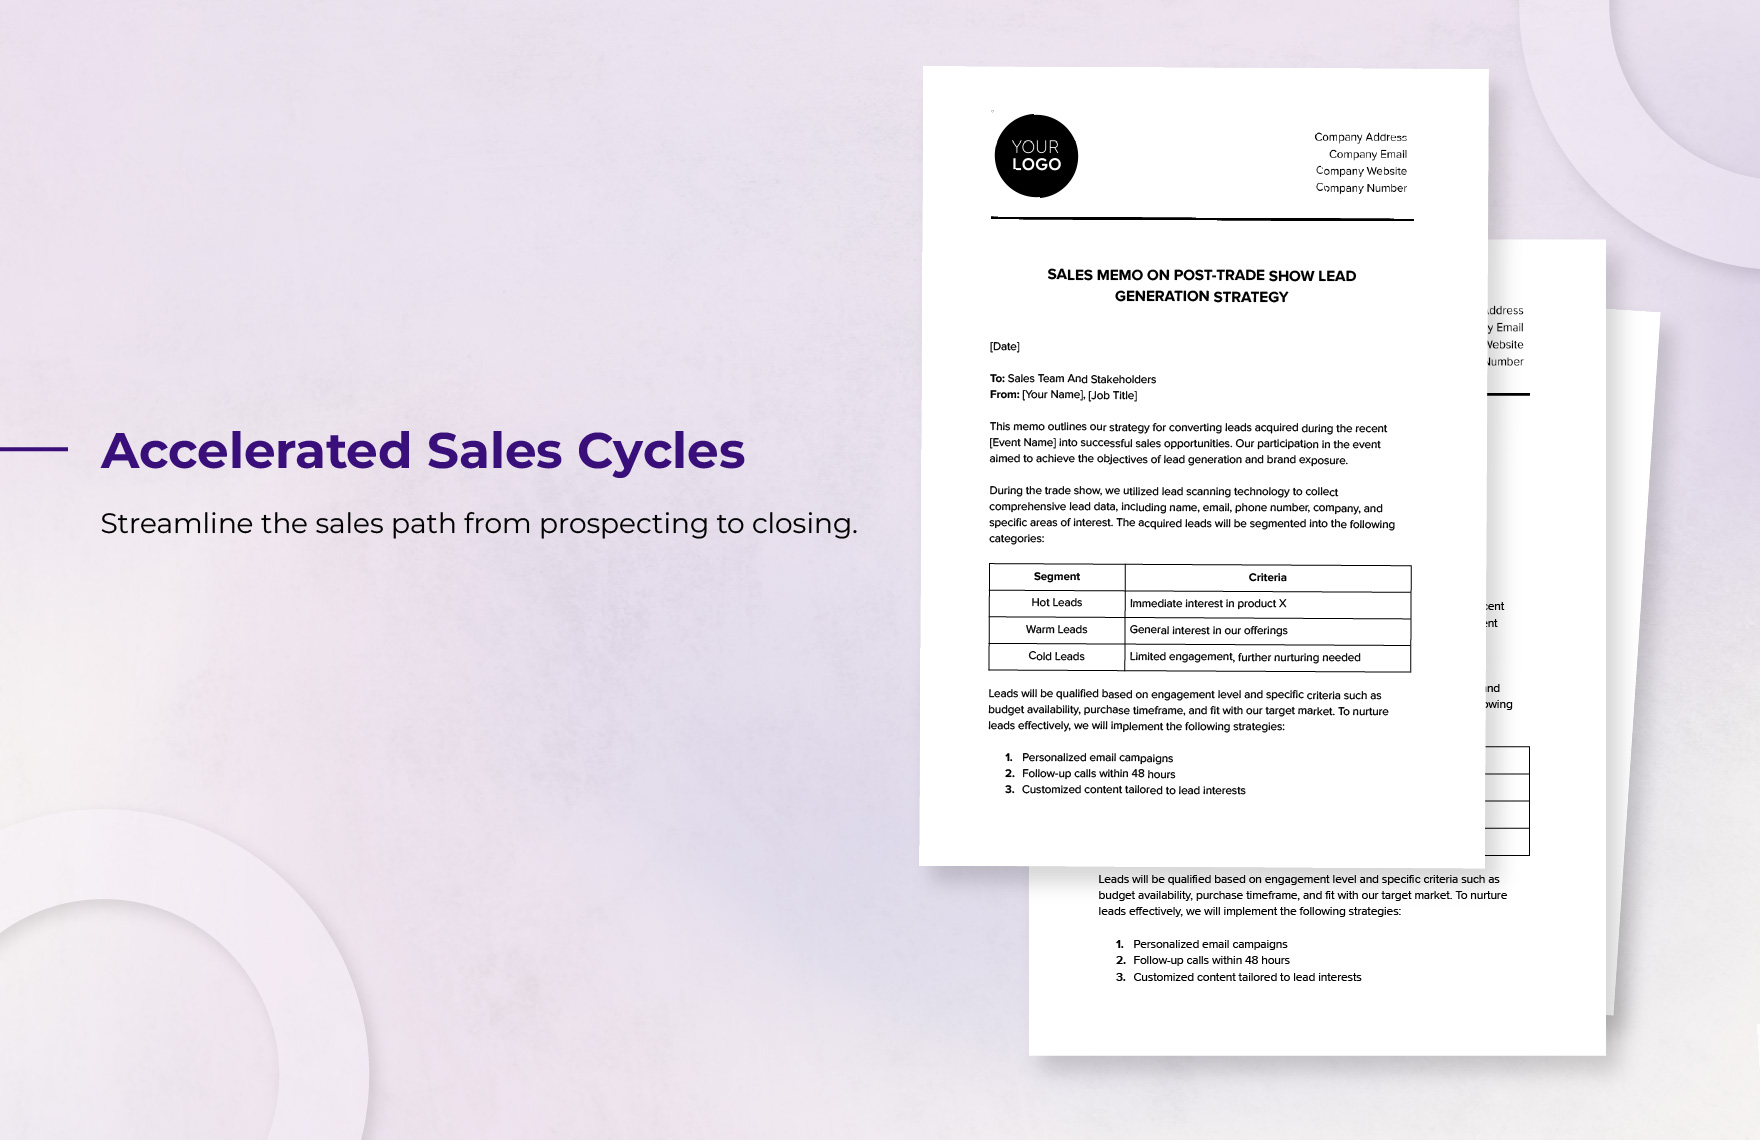 Sales Memo on PostTrade Show Lead Generation Strategy Template